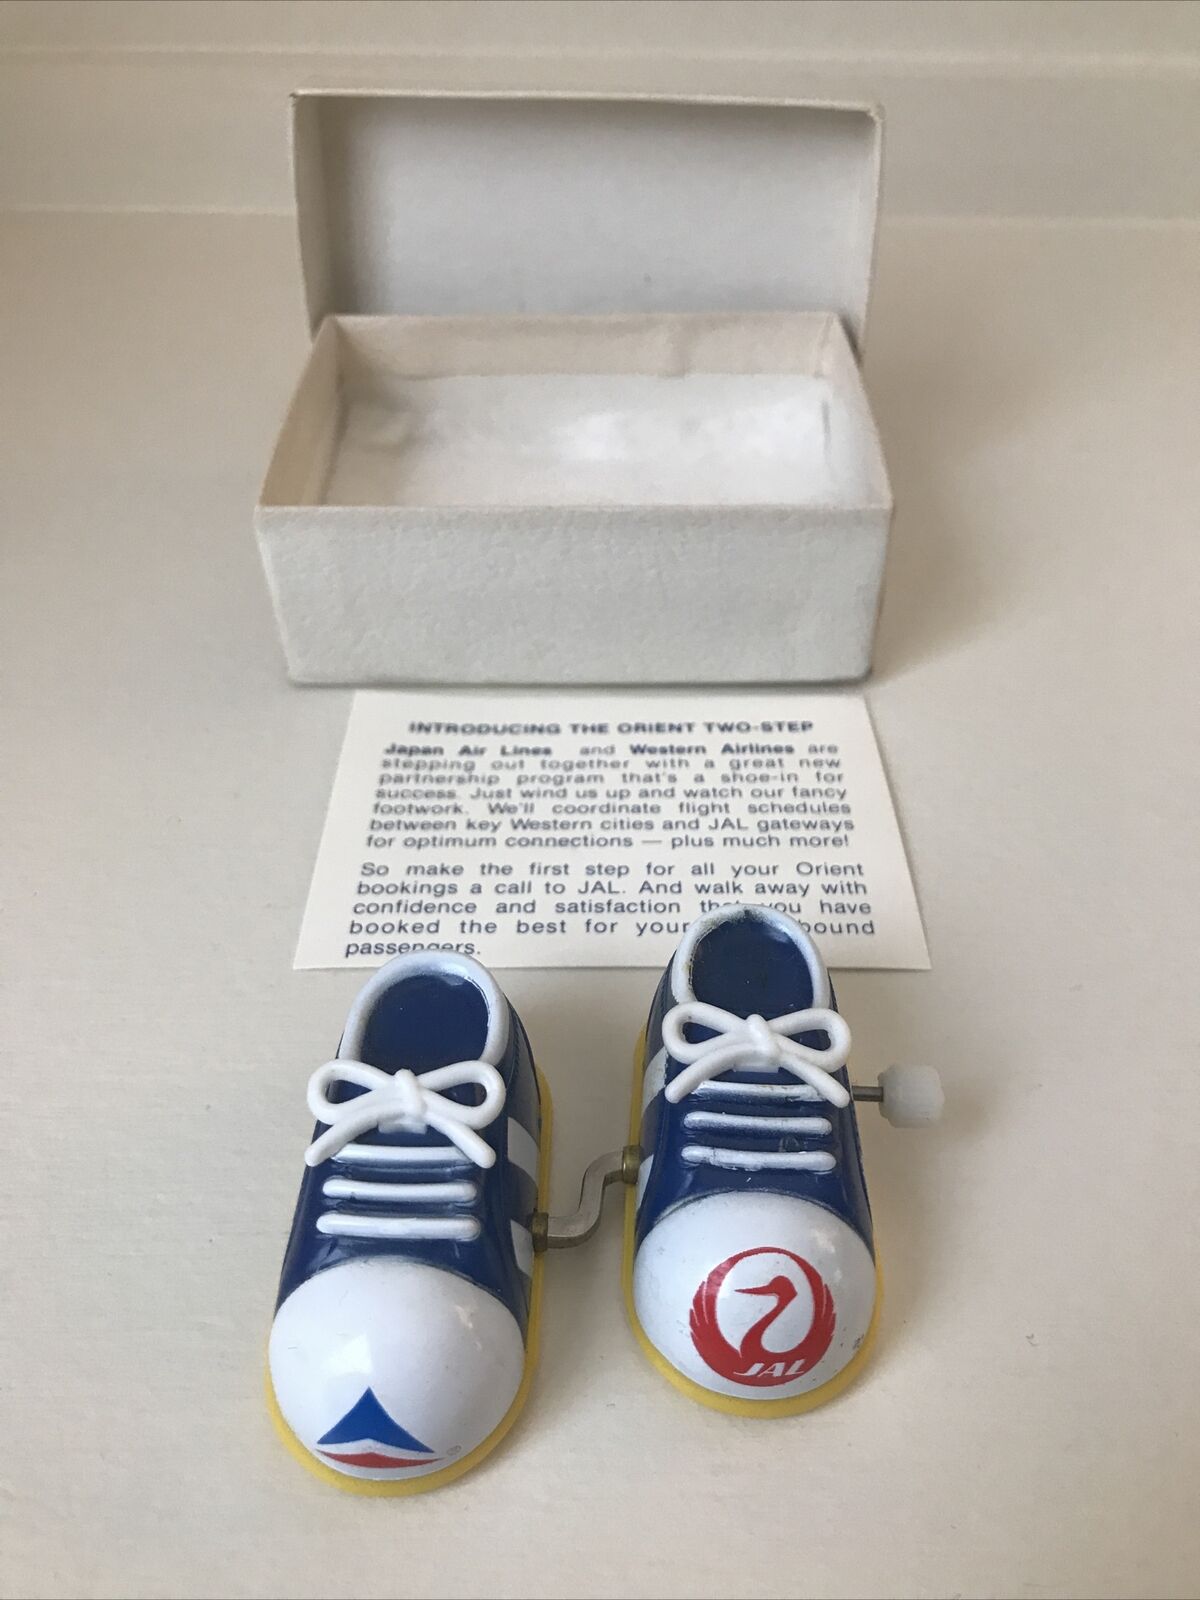 Super Rare Vintage Delta Airlines Japan Airlines Promo Tomy Shoes Advertising